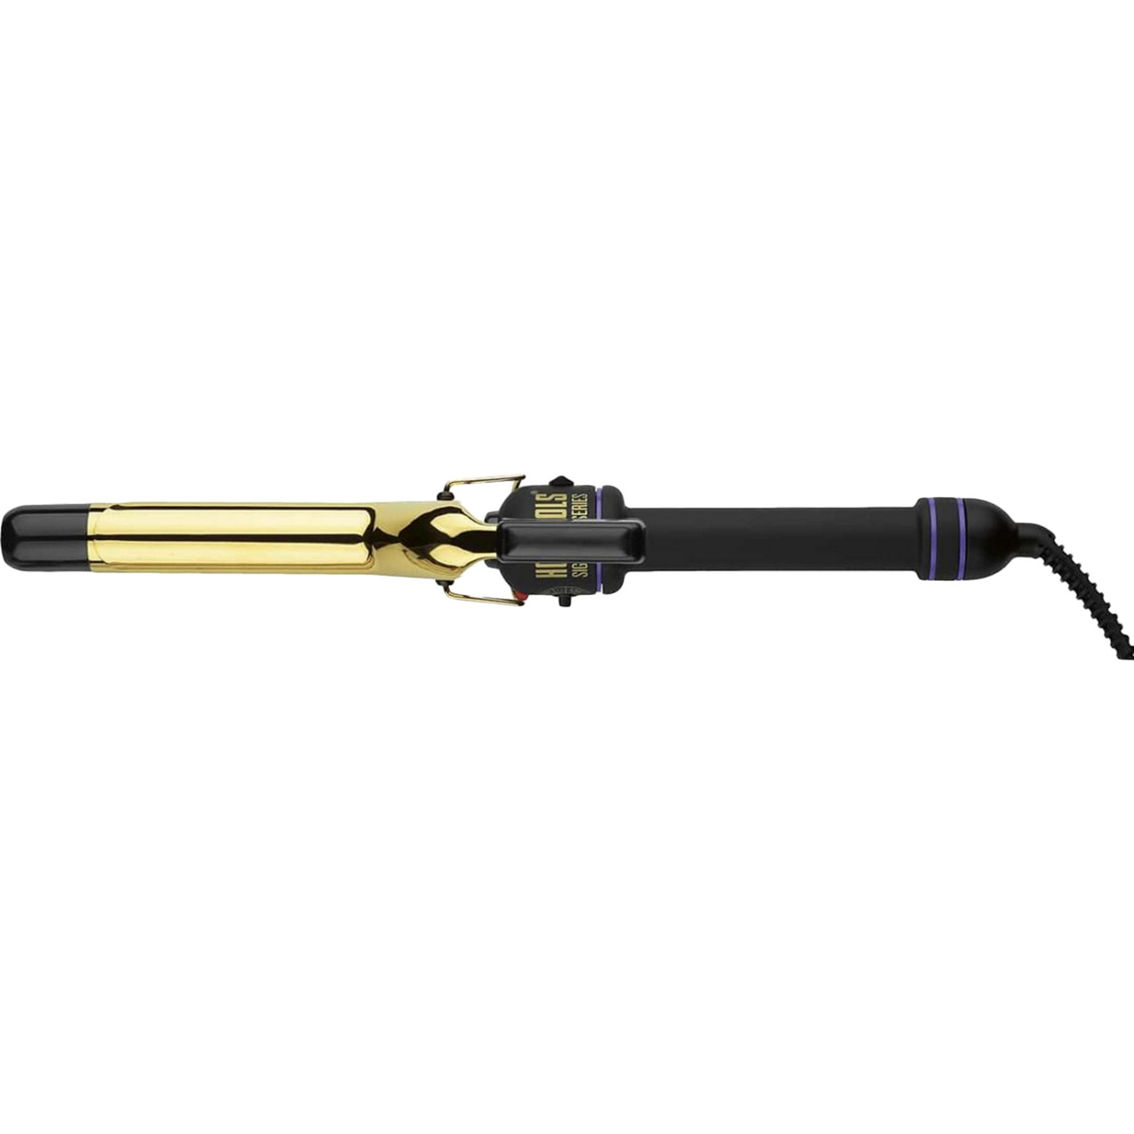 Hot Tools Signature Series 1 in. Gold Curling Iron Wand - Image 2 of 5